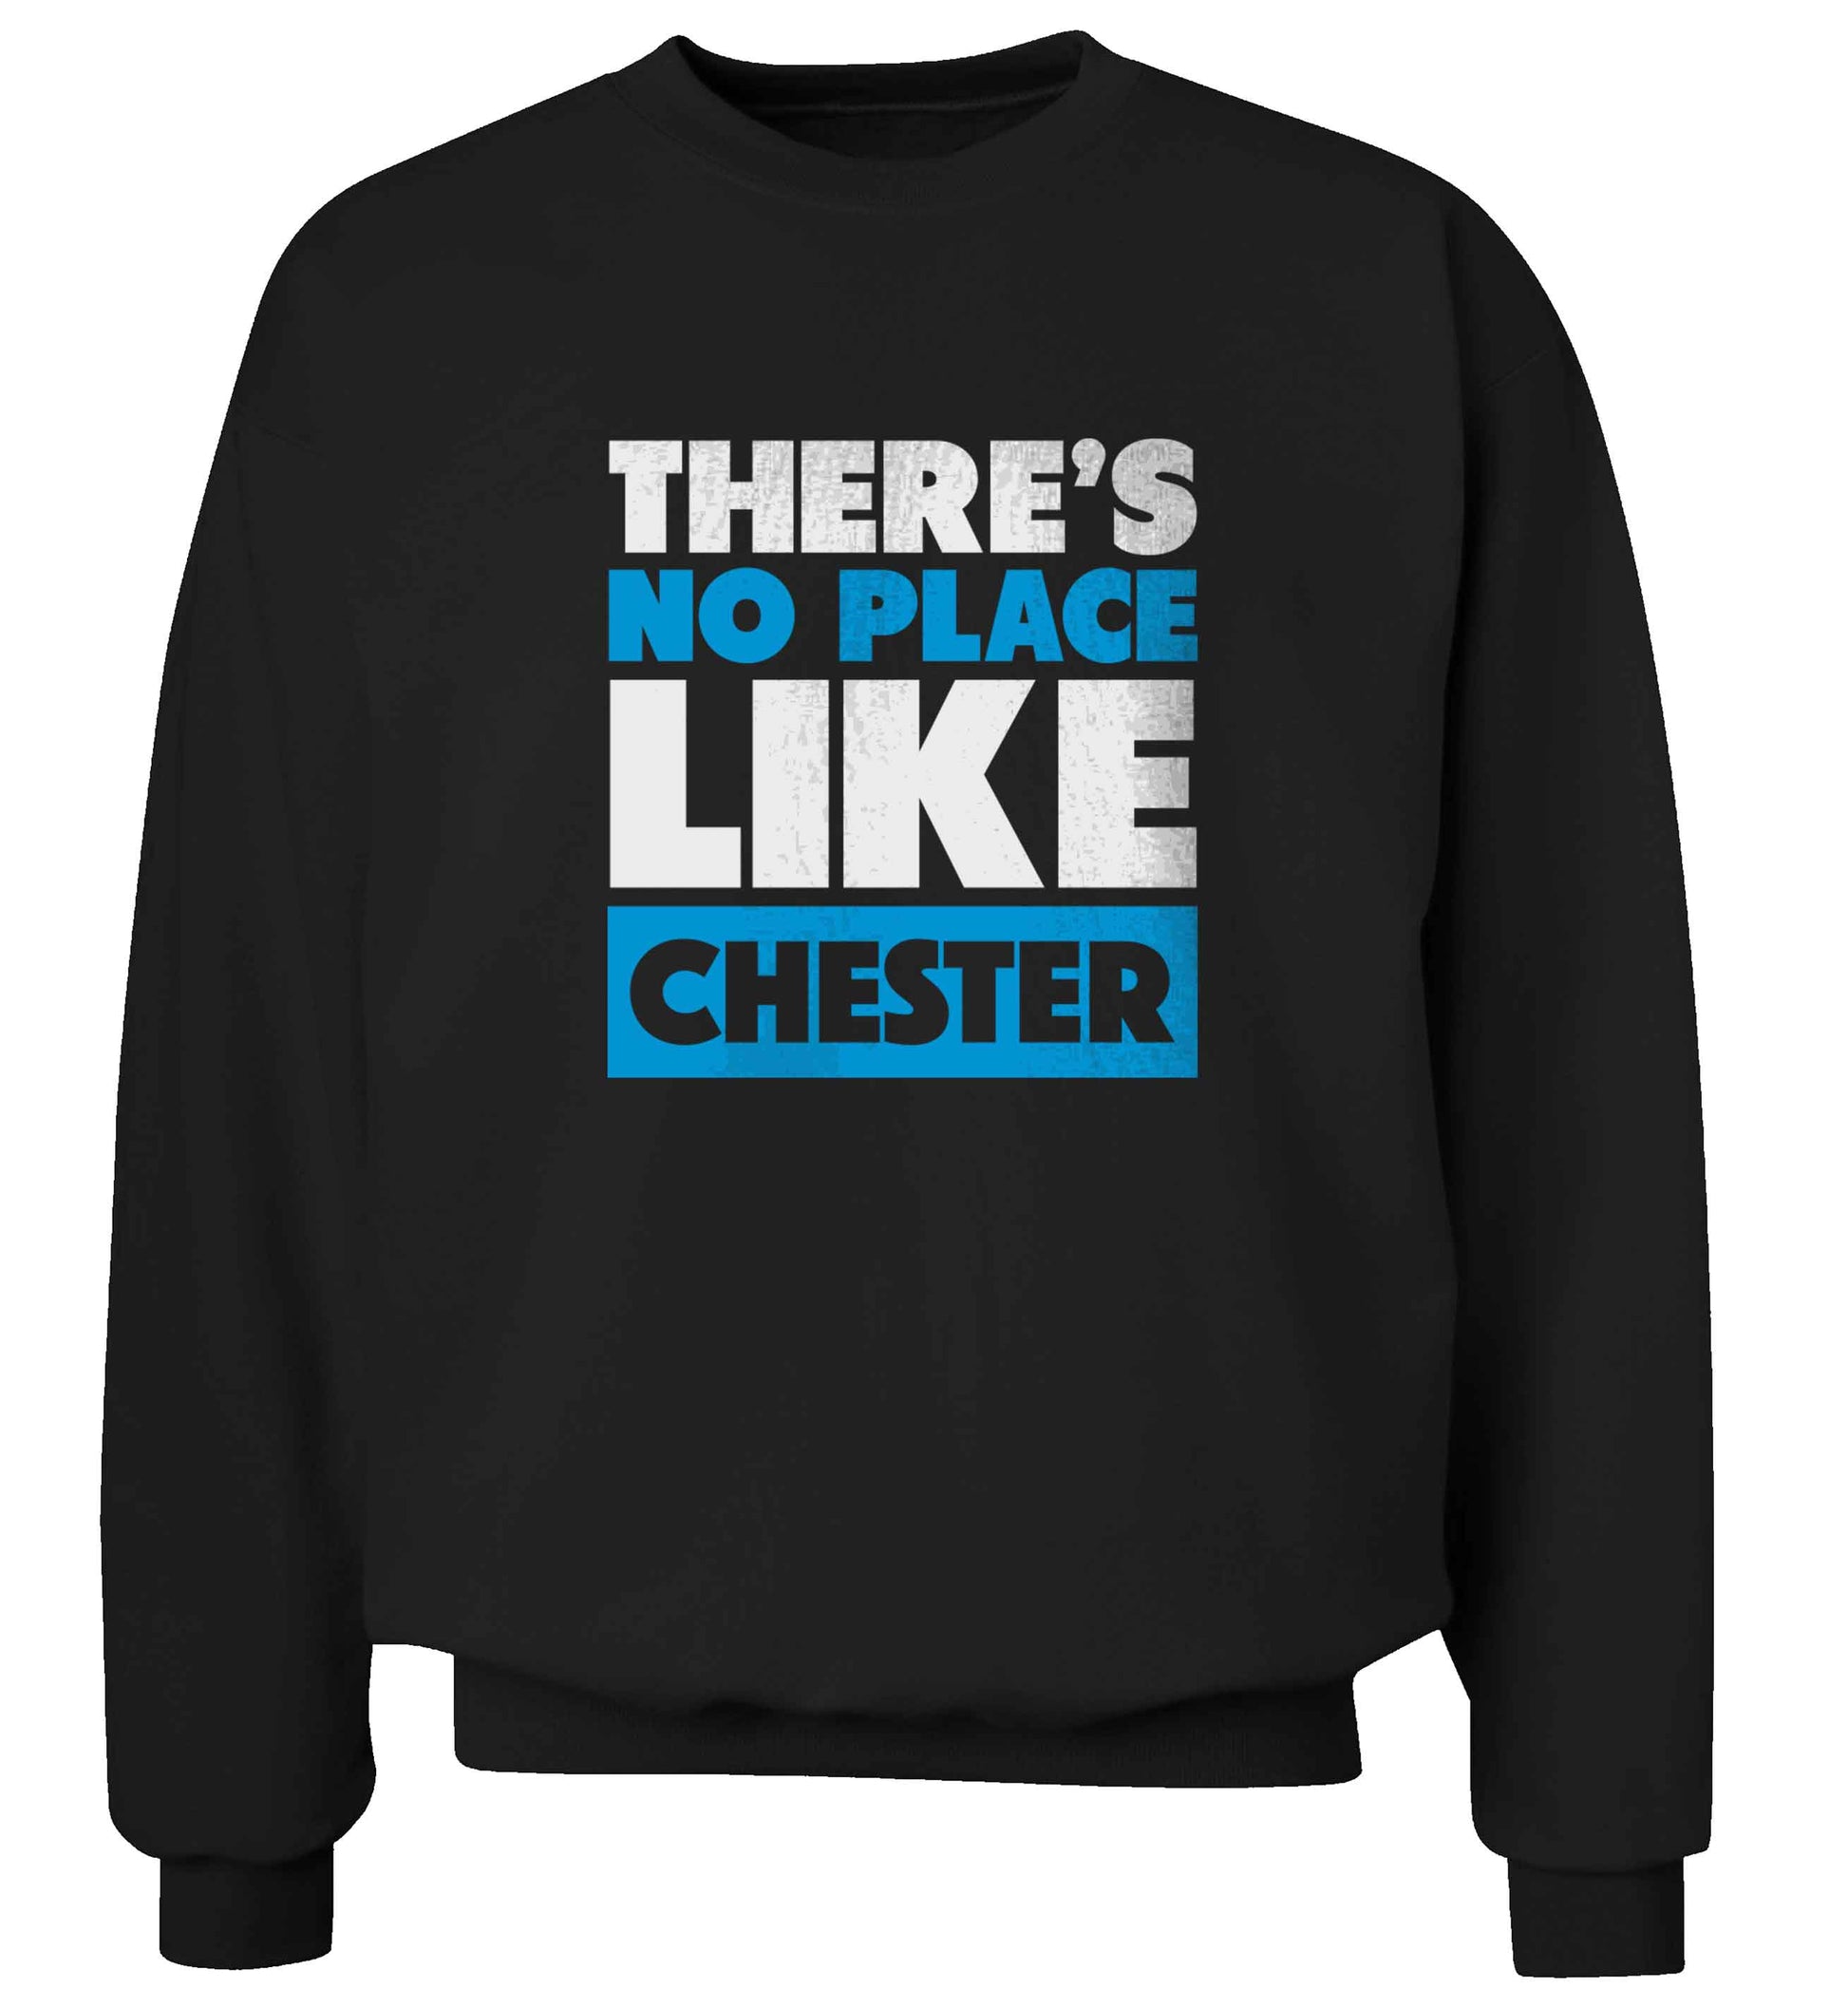 There's no place like Chester adult's unisex black sweater 2XL